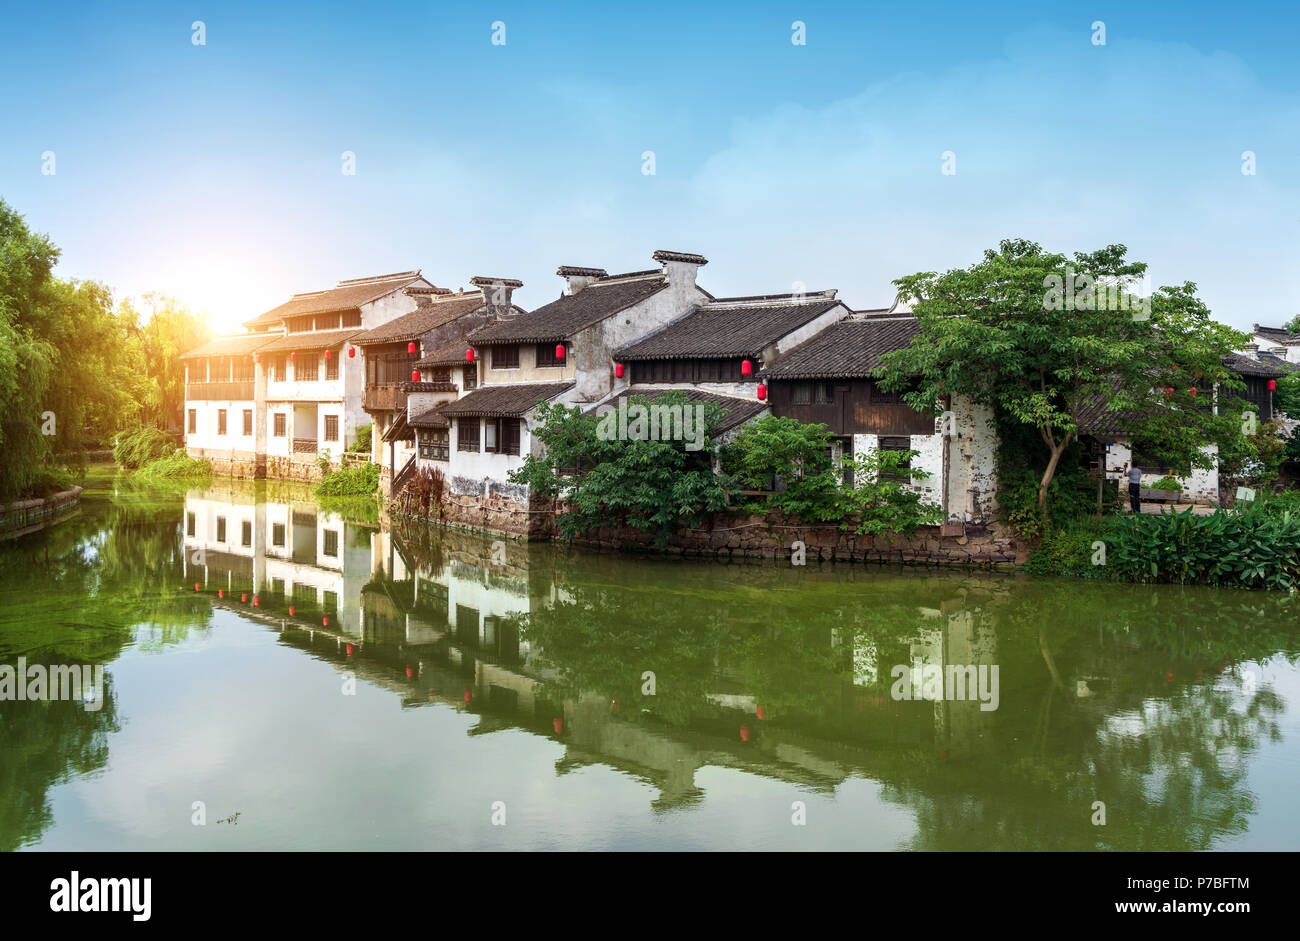 Wuxi, a famous water town in China Stock Photo